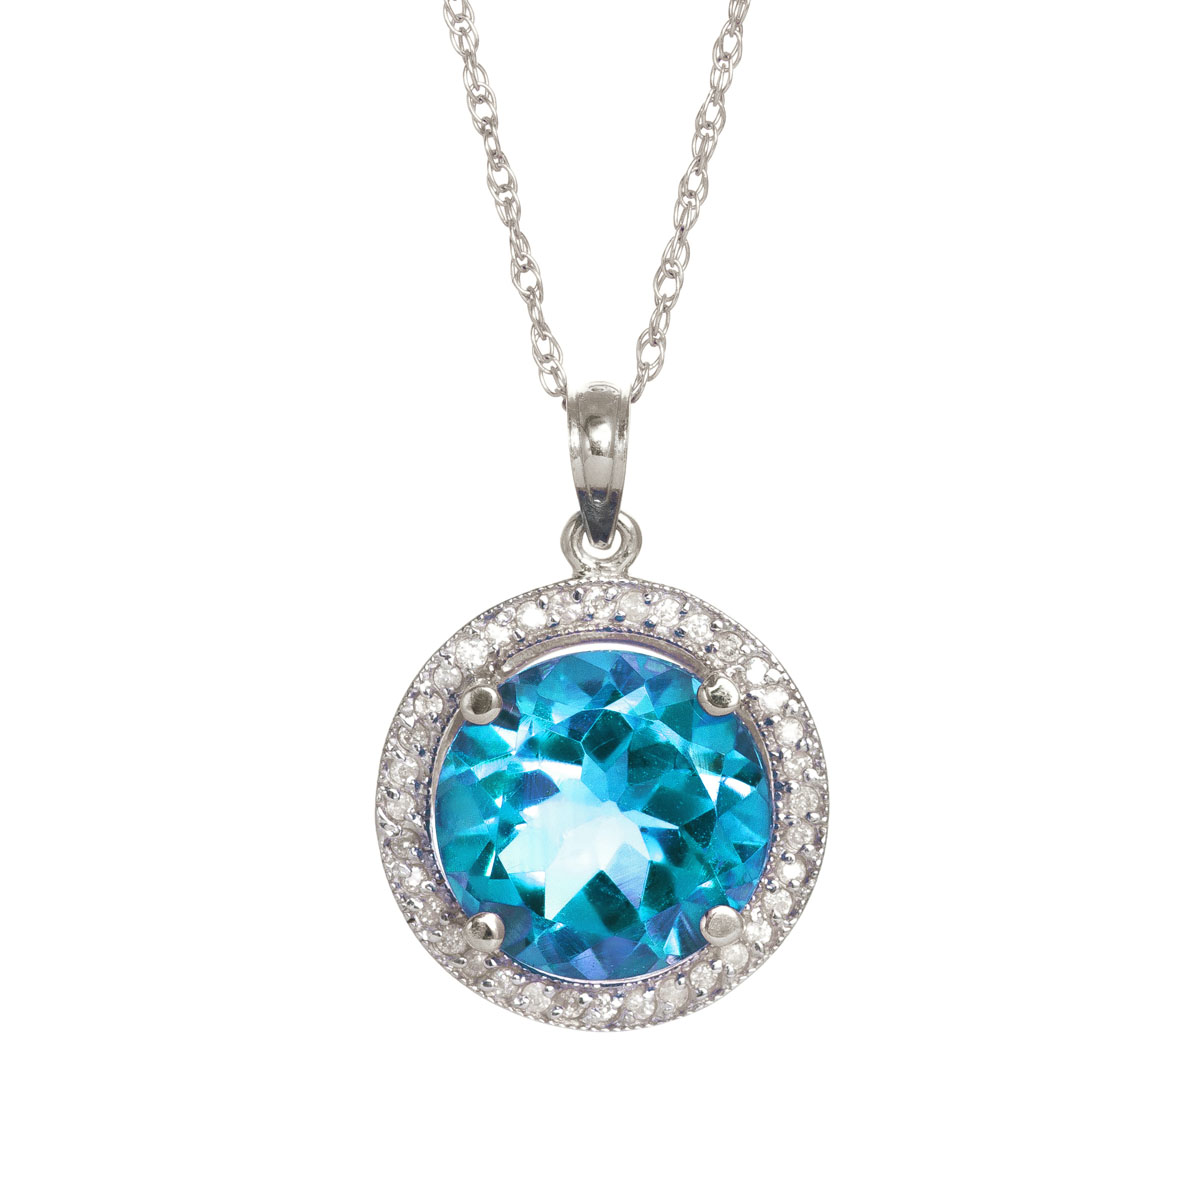 Blue Topaz Halo Pendant Necklace 8 ctw in 9ct White Gold